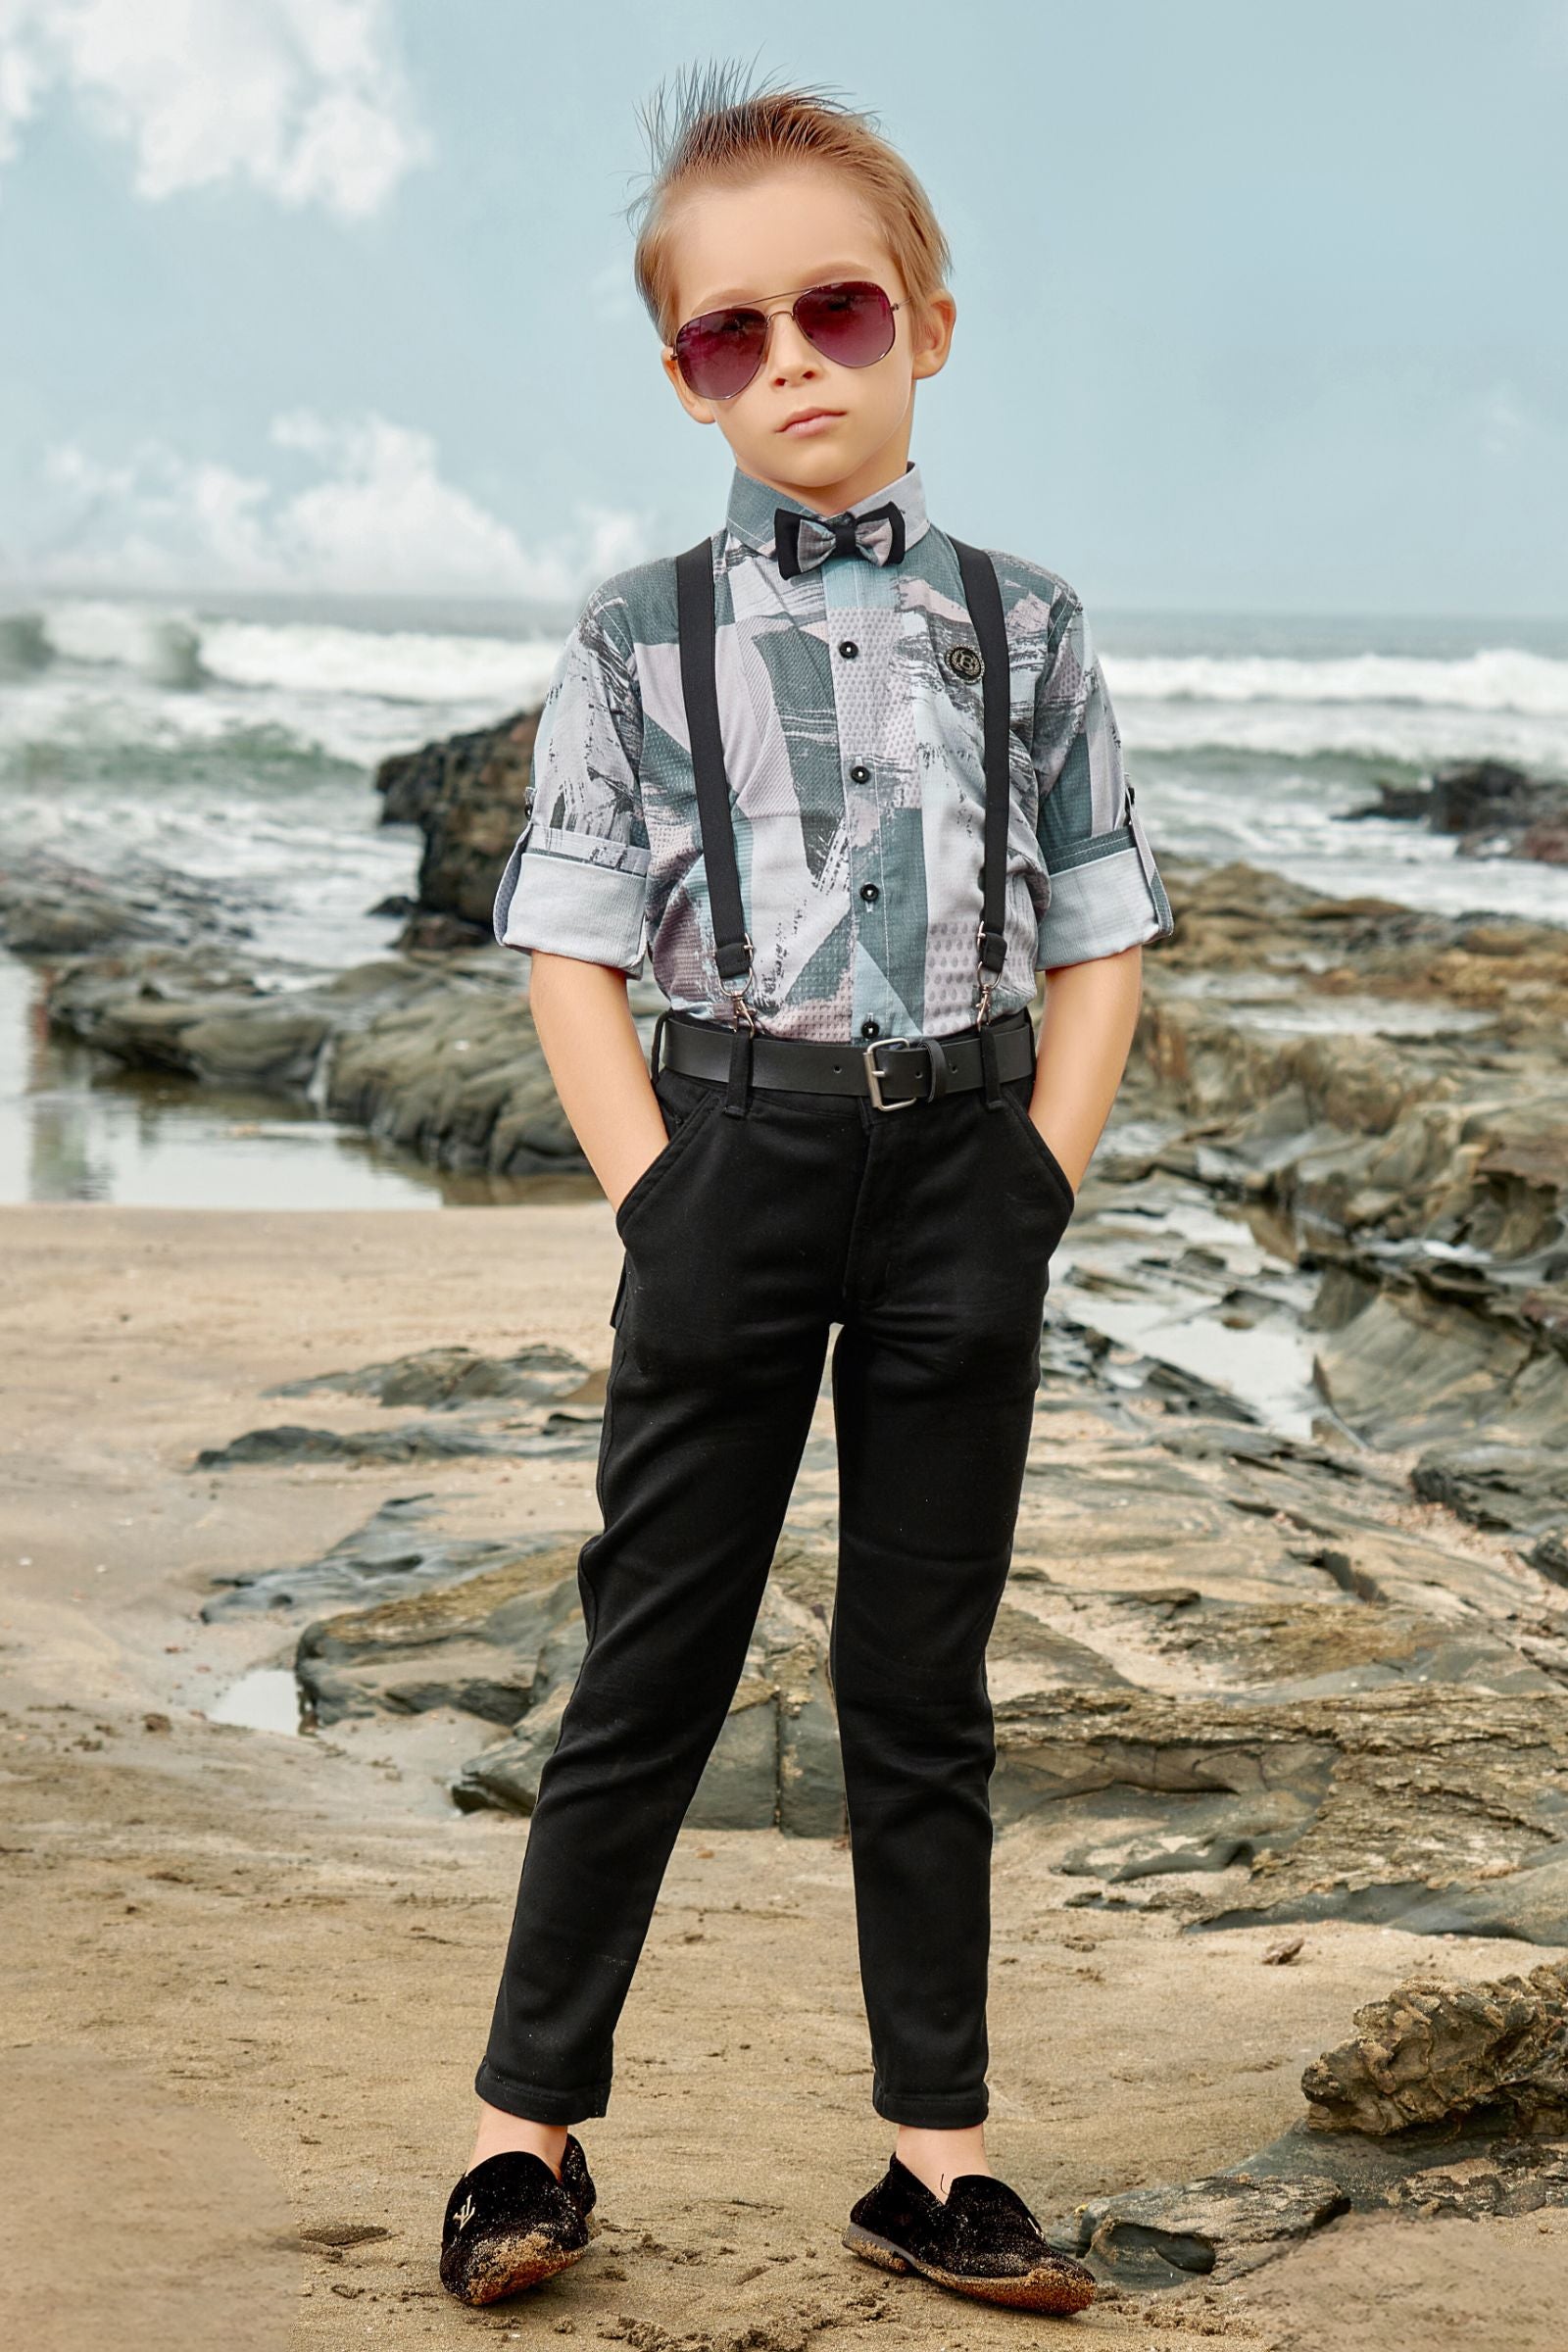 Baby Boys Set Toddler Gentleman Suit Baptism Bowtie Suspender Outfits –  toddlerme